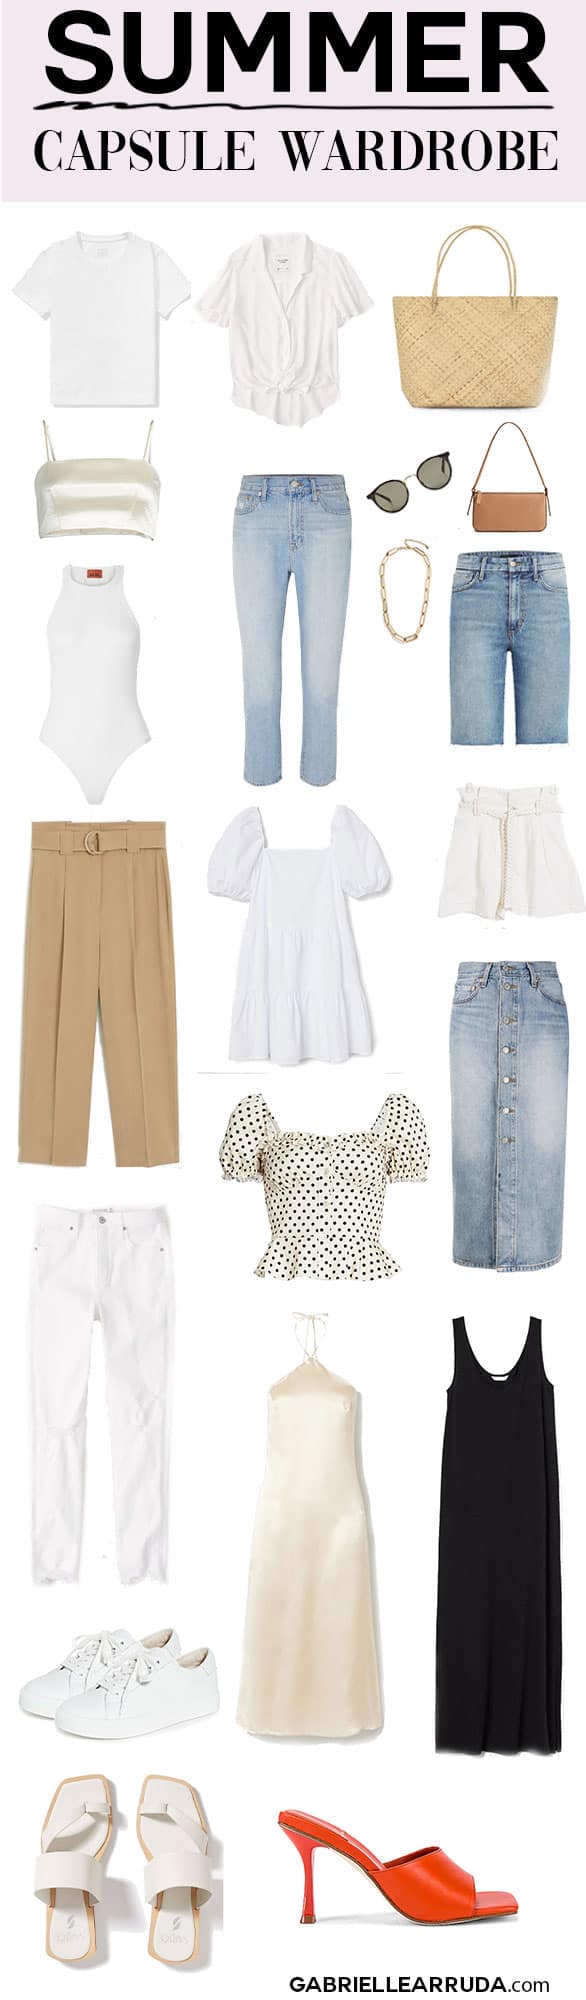 affordable summer capsule wardobe 2020 must have pieces, white t-shirt, loose blouse, straw tote, halter bodysuit, elegant crop top, mid rise jeans, bermuda denim shorts, puff sleeve blouse, square toe mule, tank dress, simple sandal, classic white sneaker, straw tote, baguette style purse.